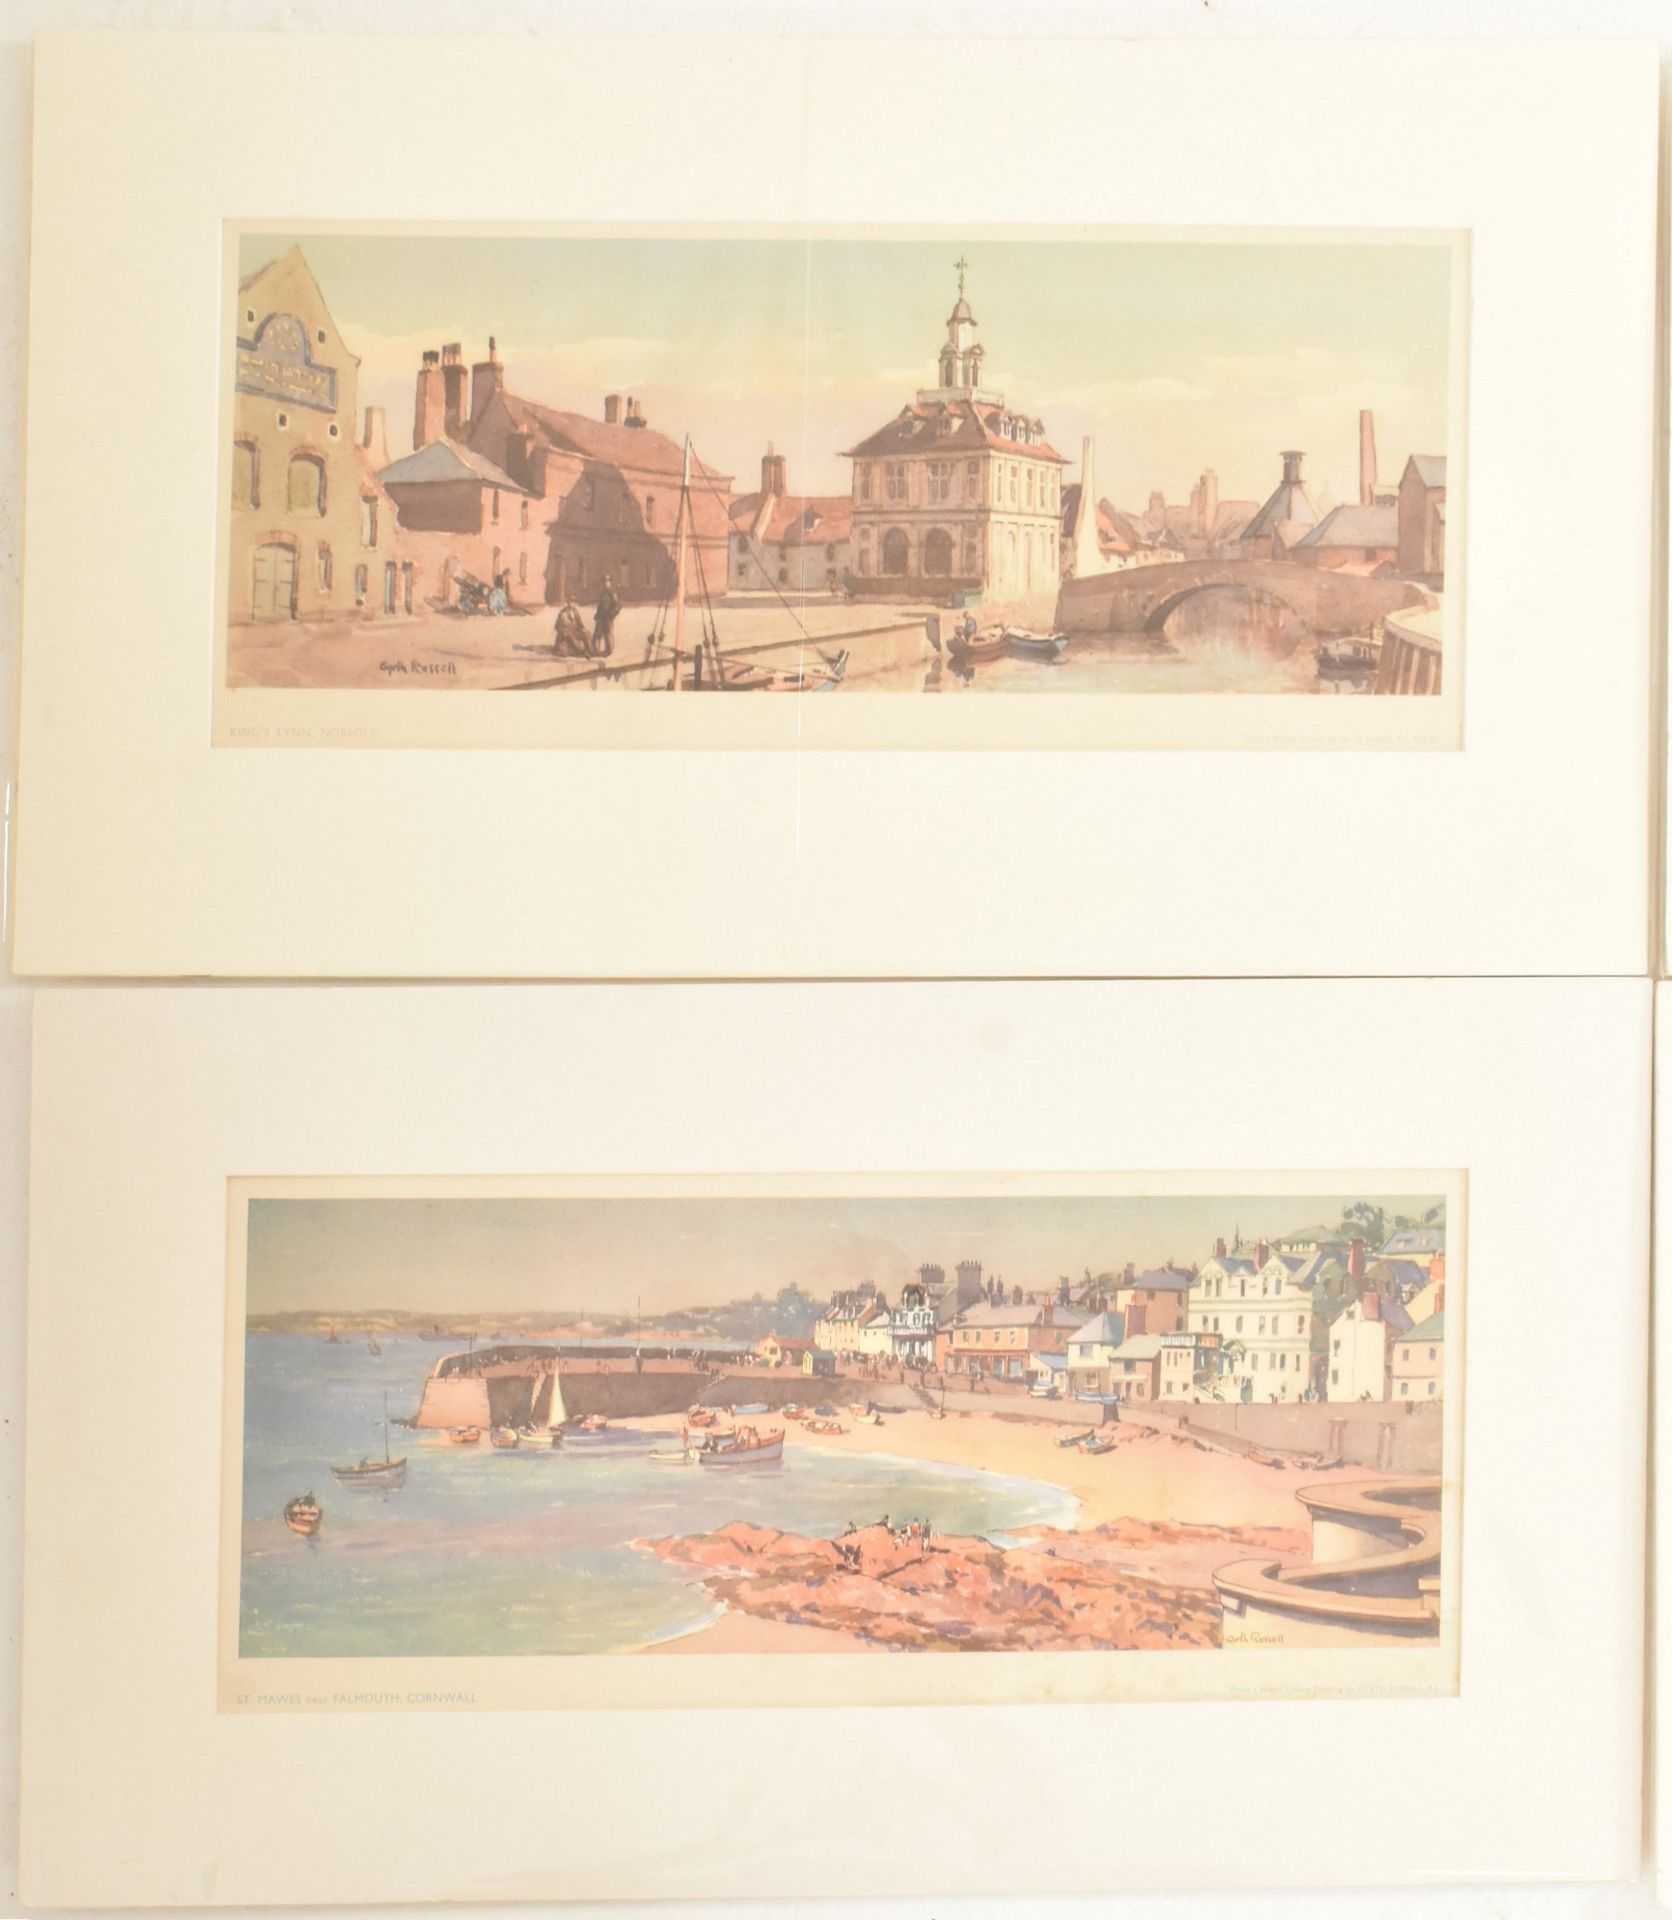 SIX BRITISH RAIL CARRIAGE PRINTS FROM GYRTH RUSSELL PAINTINGS - Image 2 of 5